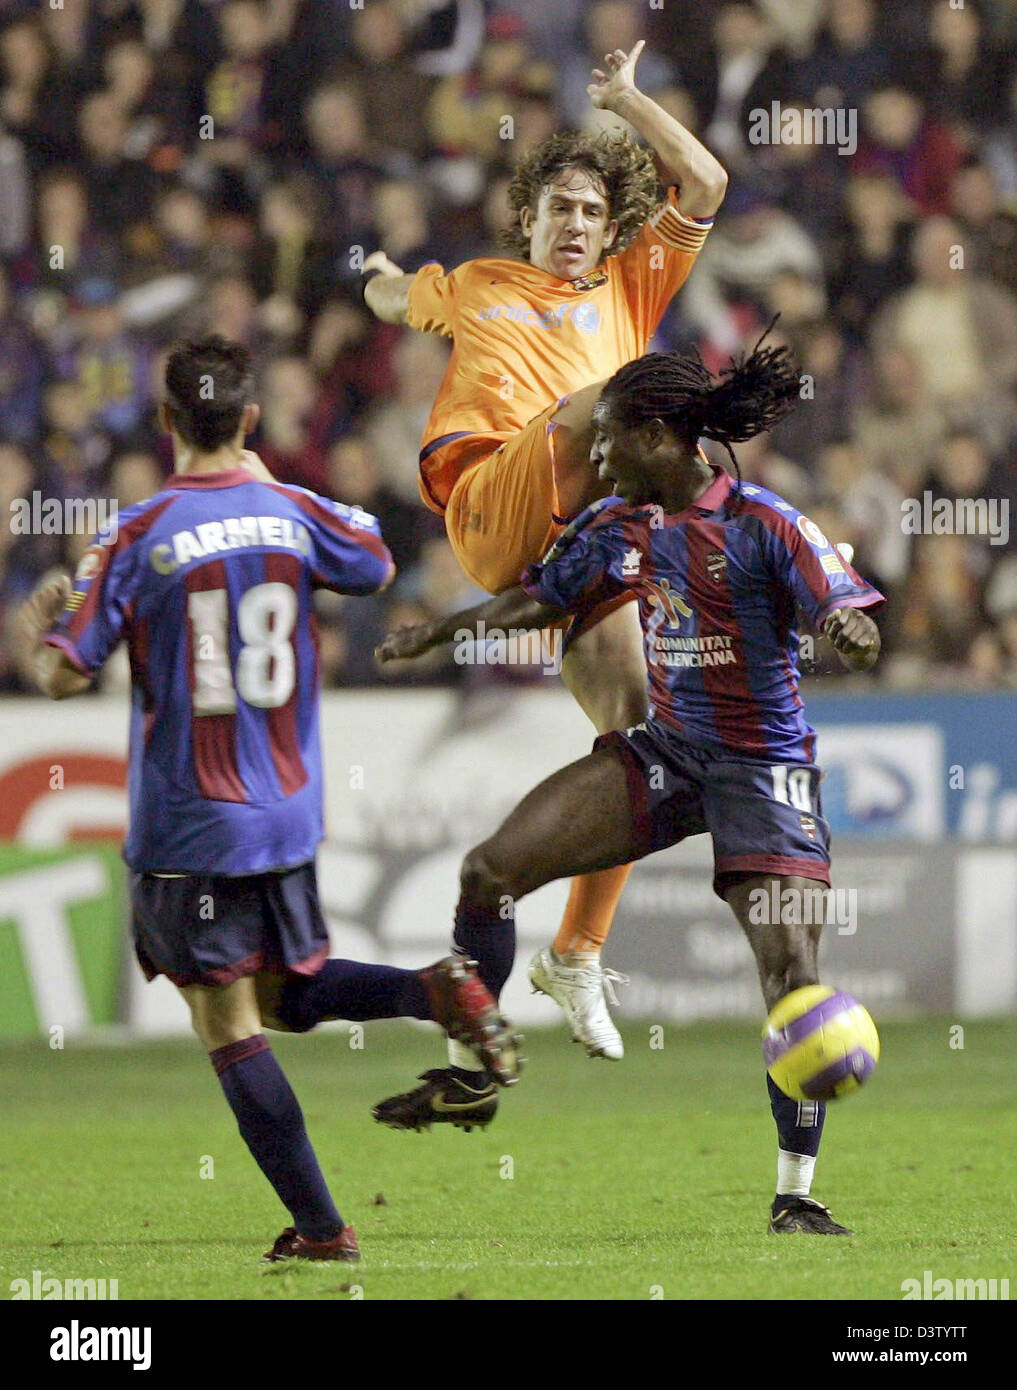 Carles Puyol (top) of Barcelona vies for the ball with Levante's Mustapha Riga and Carmelo Gonzales during the Primera Division match UD Levante vs FC Barcelona at Ciudad de Valencia stadium in Valencia, Spain, Saturday, 02 December 2006. The match ended 1-1. Photo: Juan Carlos Cardenas Stock Photo